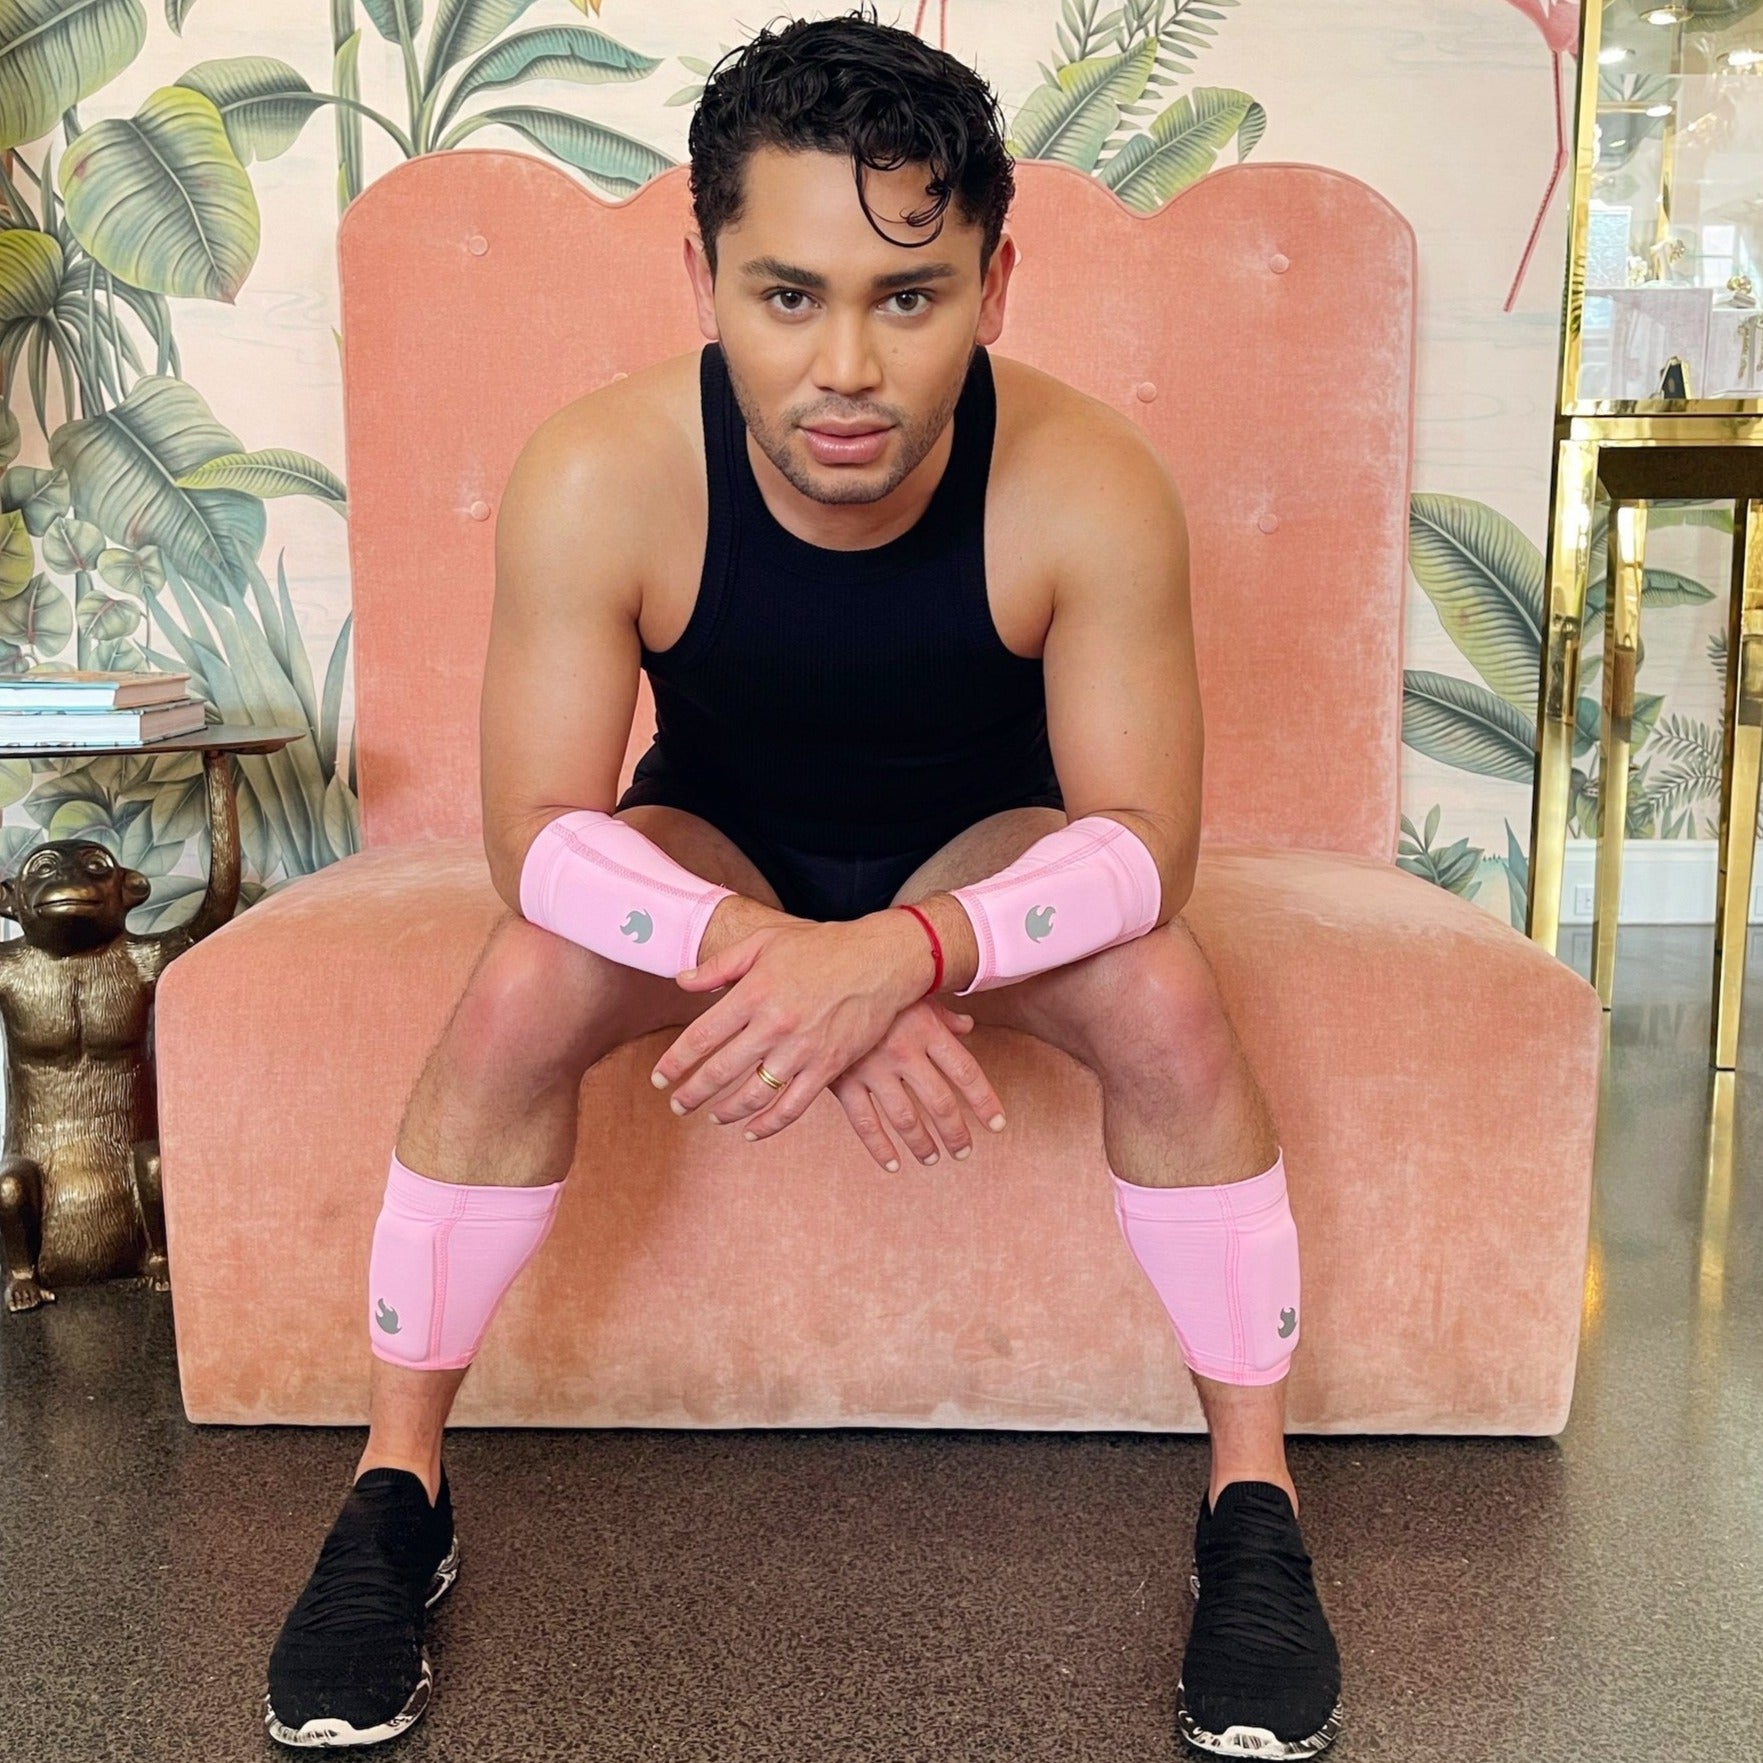 Image showing Isaac Boots sitting in a chair, leaning on his knees wearing the pink weighted arm and leg bands with the flame logo in silver on each band.